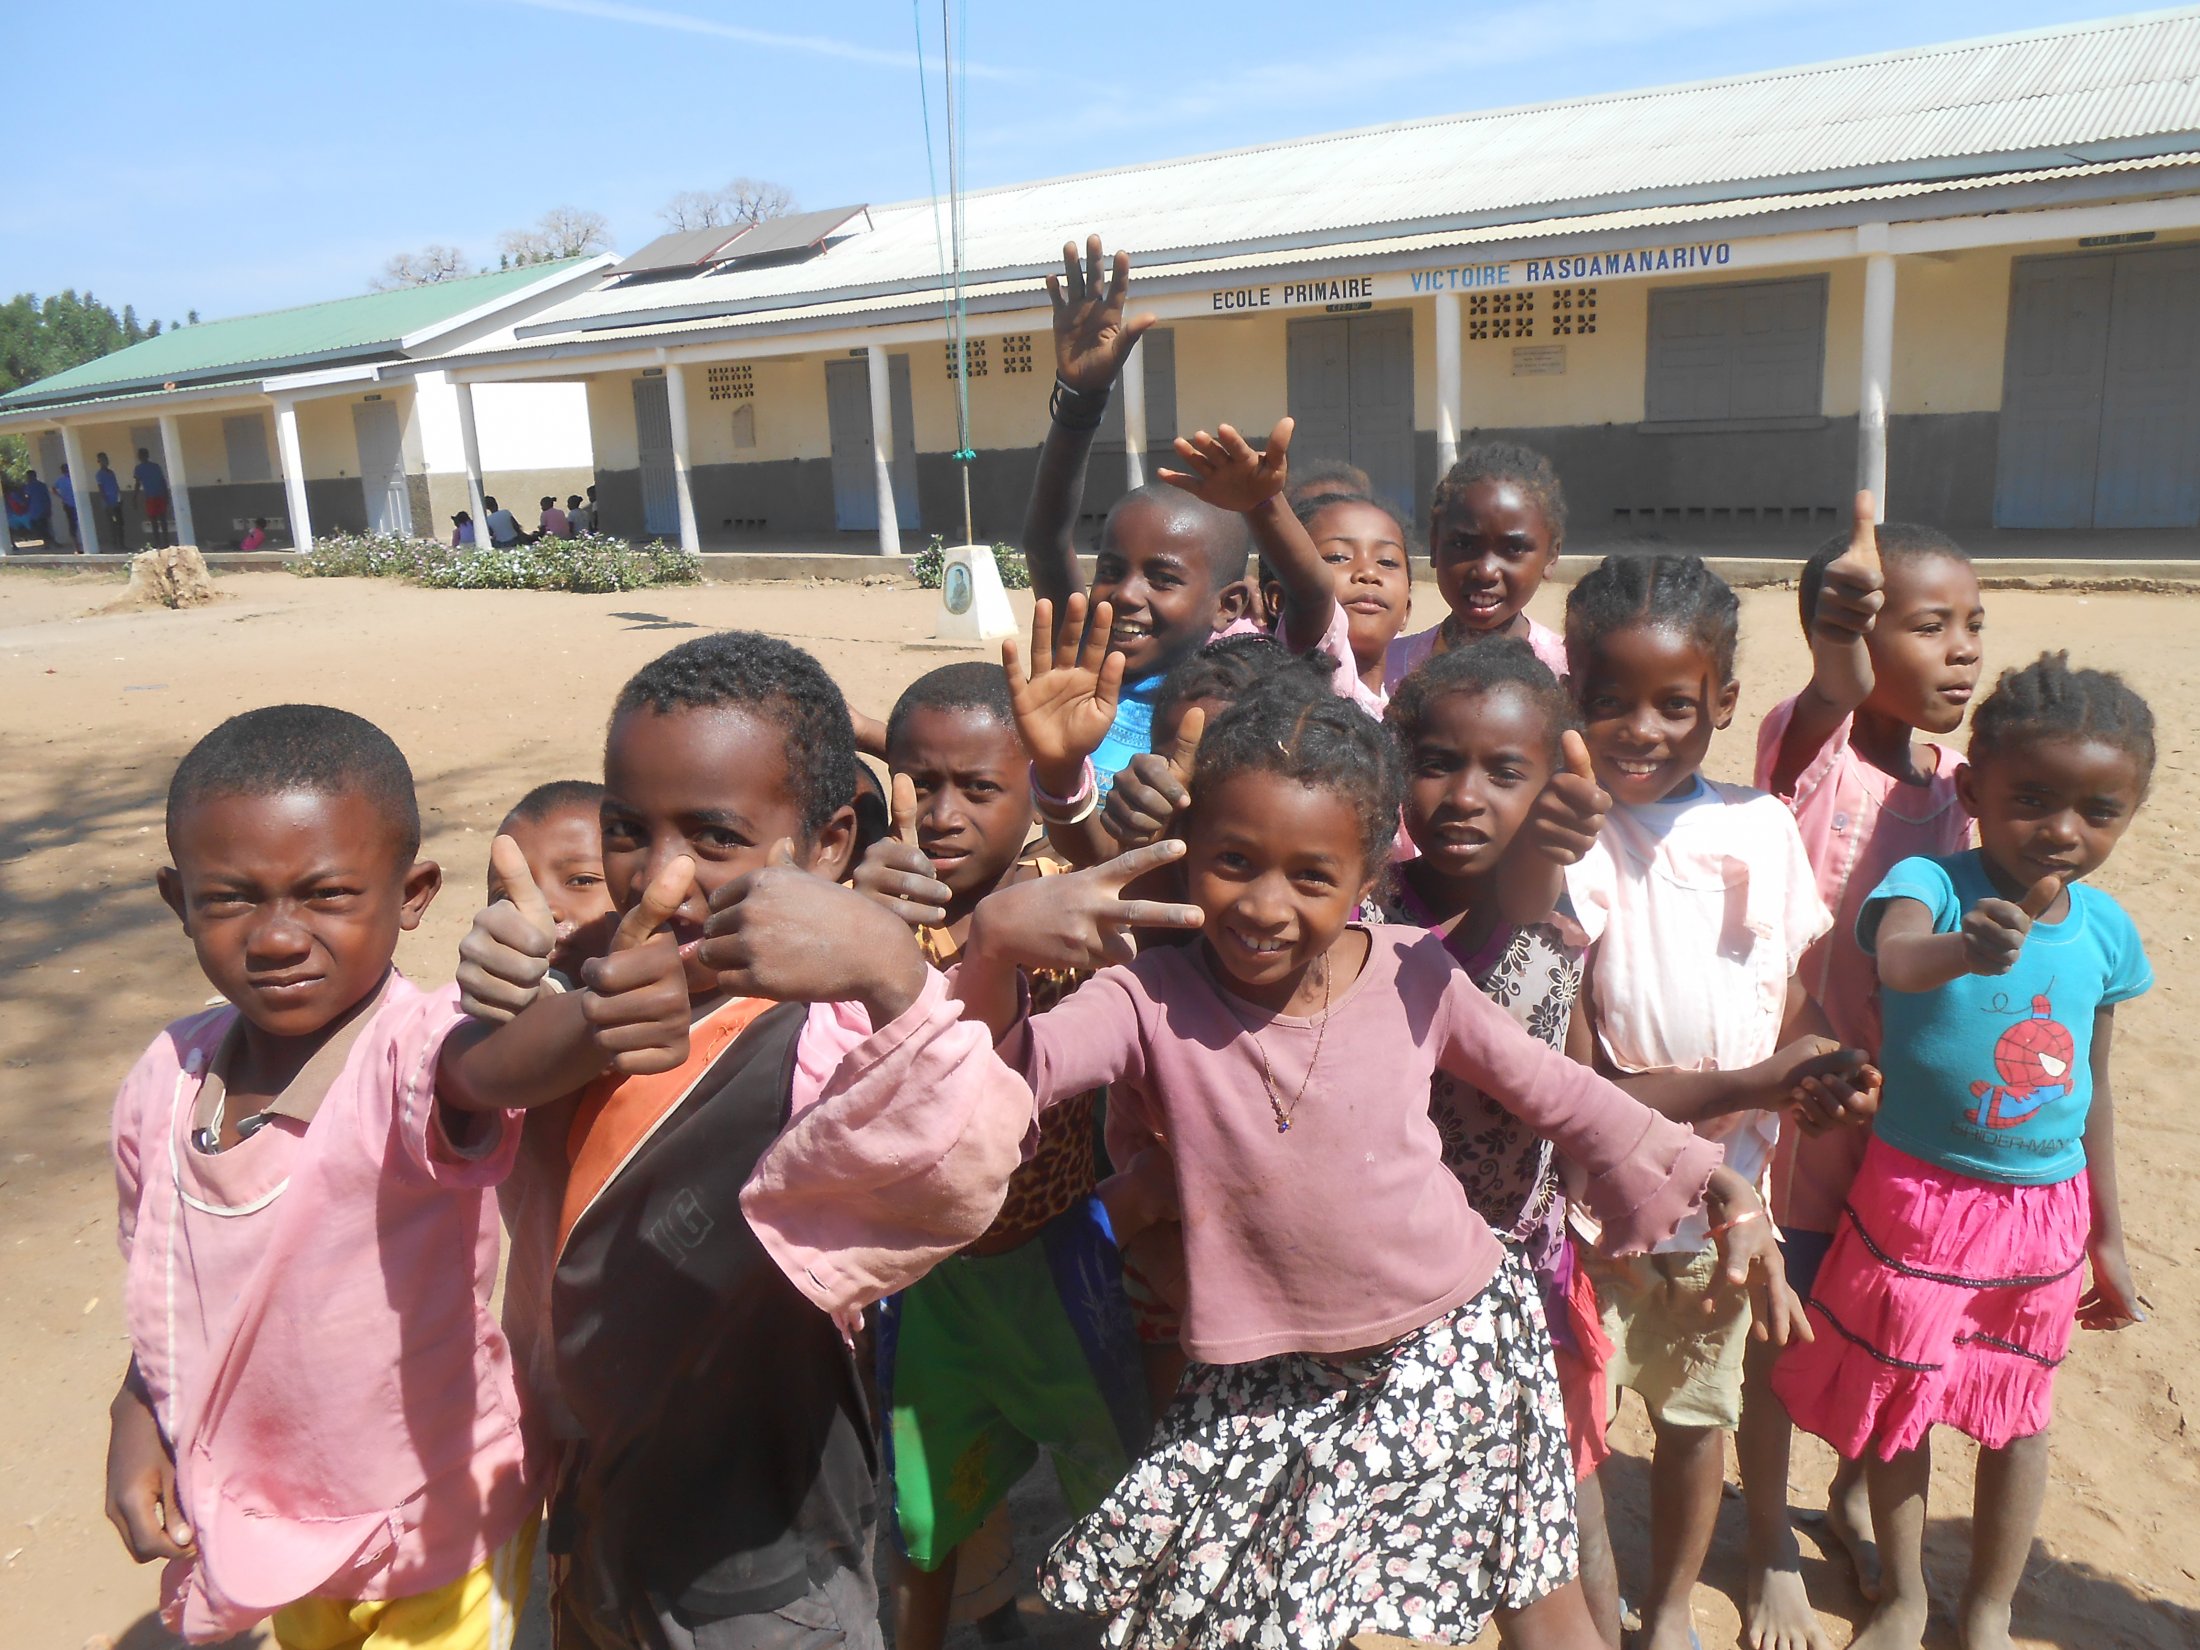 Madaquatre raises funds for the construction of bush schools in the Morondava region of Madagascar. The BESIX Foundation financed the construction of new classrooms.